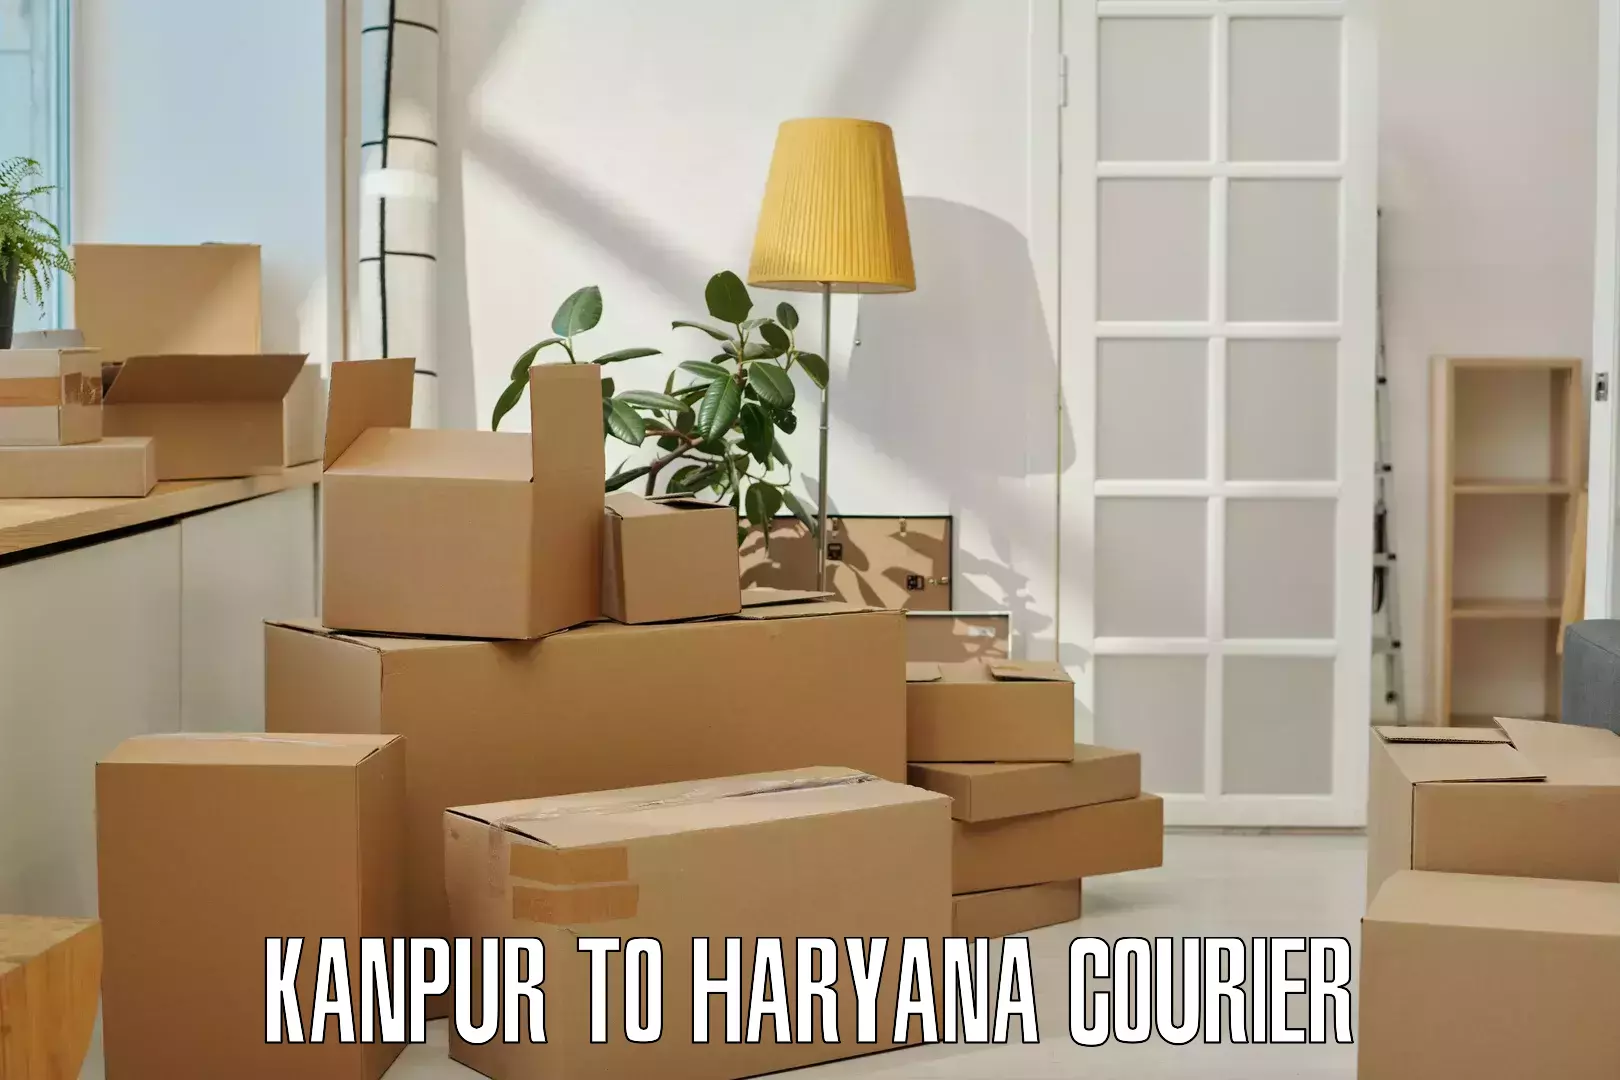 Secure package delivery Kanpur to Faridabad